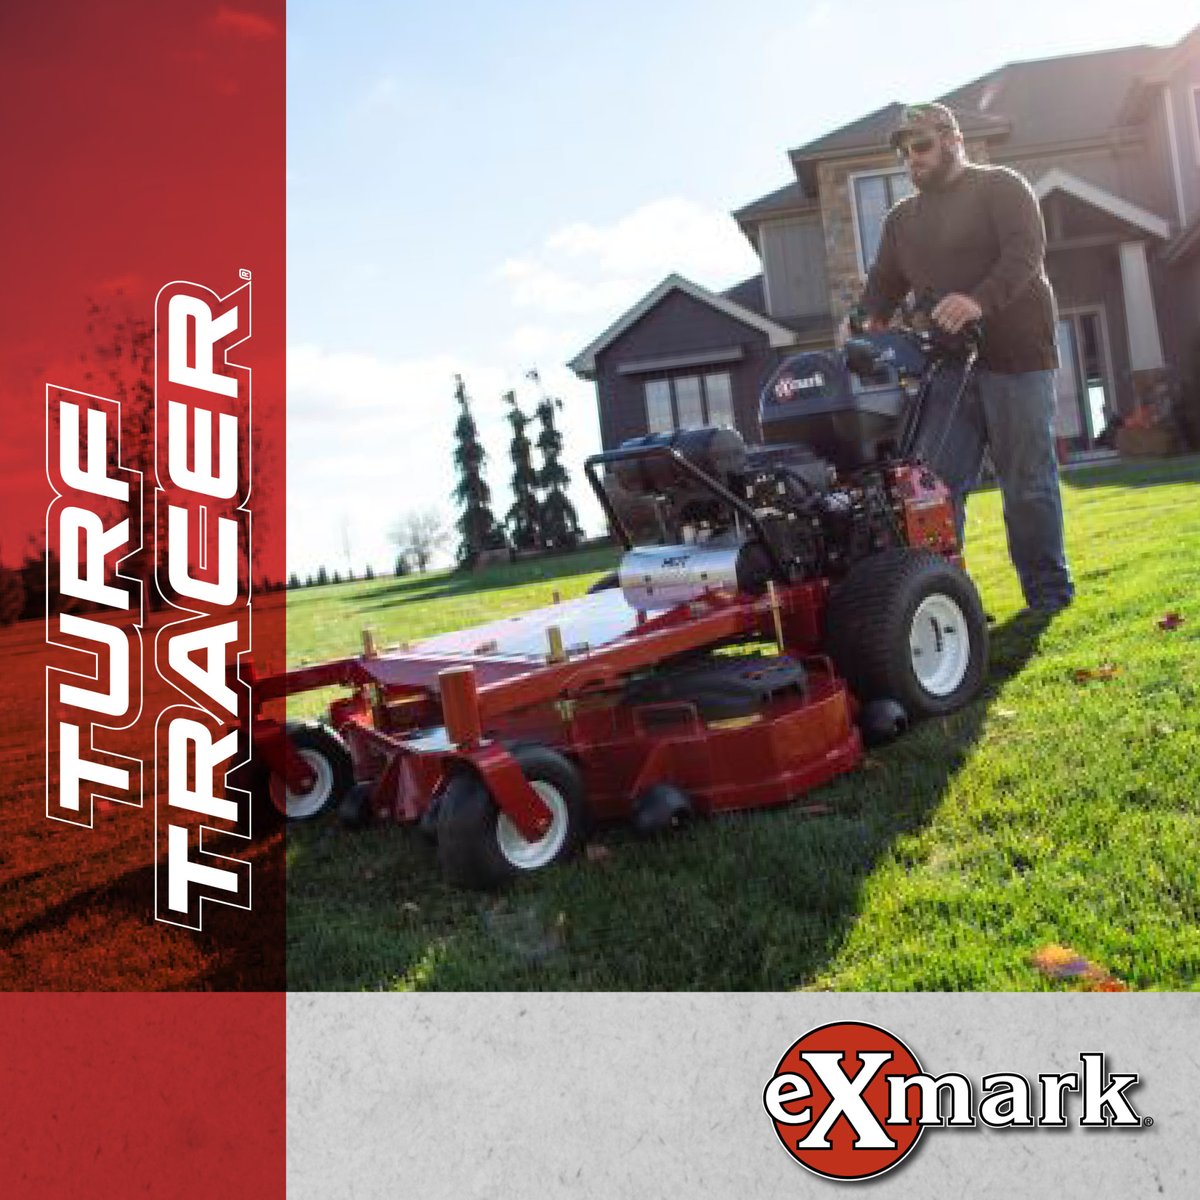 Level up your mowing game at #AdvancedMower with @Exmarkmowers Turf Tracer wide-area walk-behind #mowers!

With options of a 36, 48, 52 or 60-inch deck width, these mowers offer precision cutting, plus they can reach ground speeds of 6.75 mph!

🔗 bit.ly/3xp5JsE